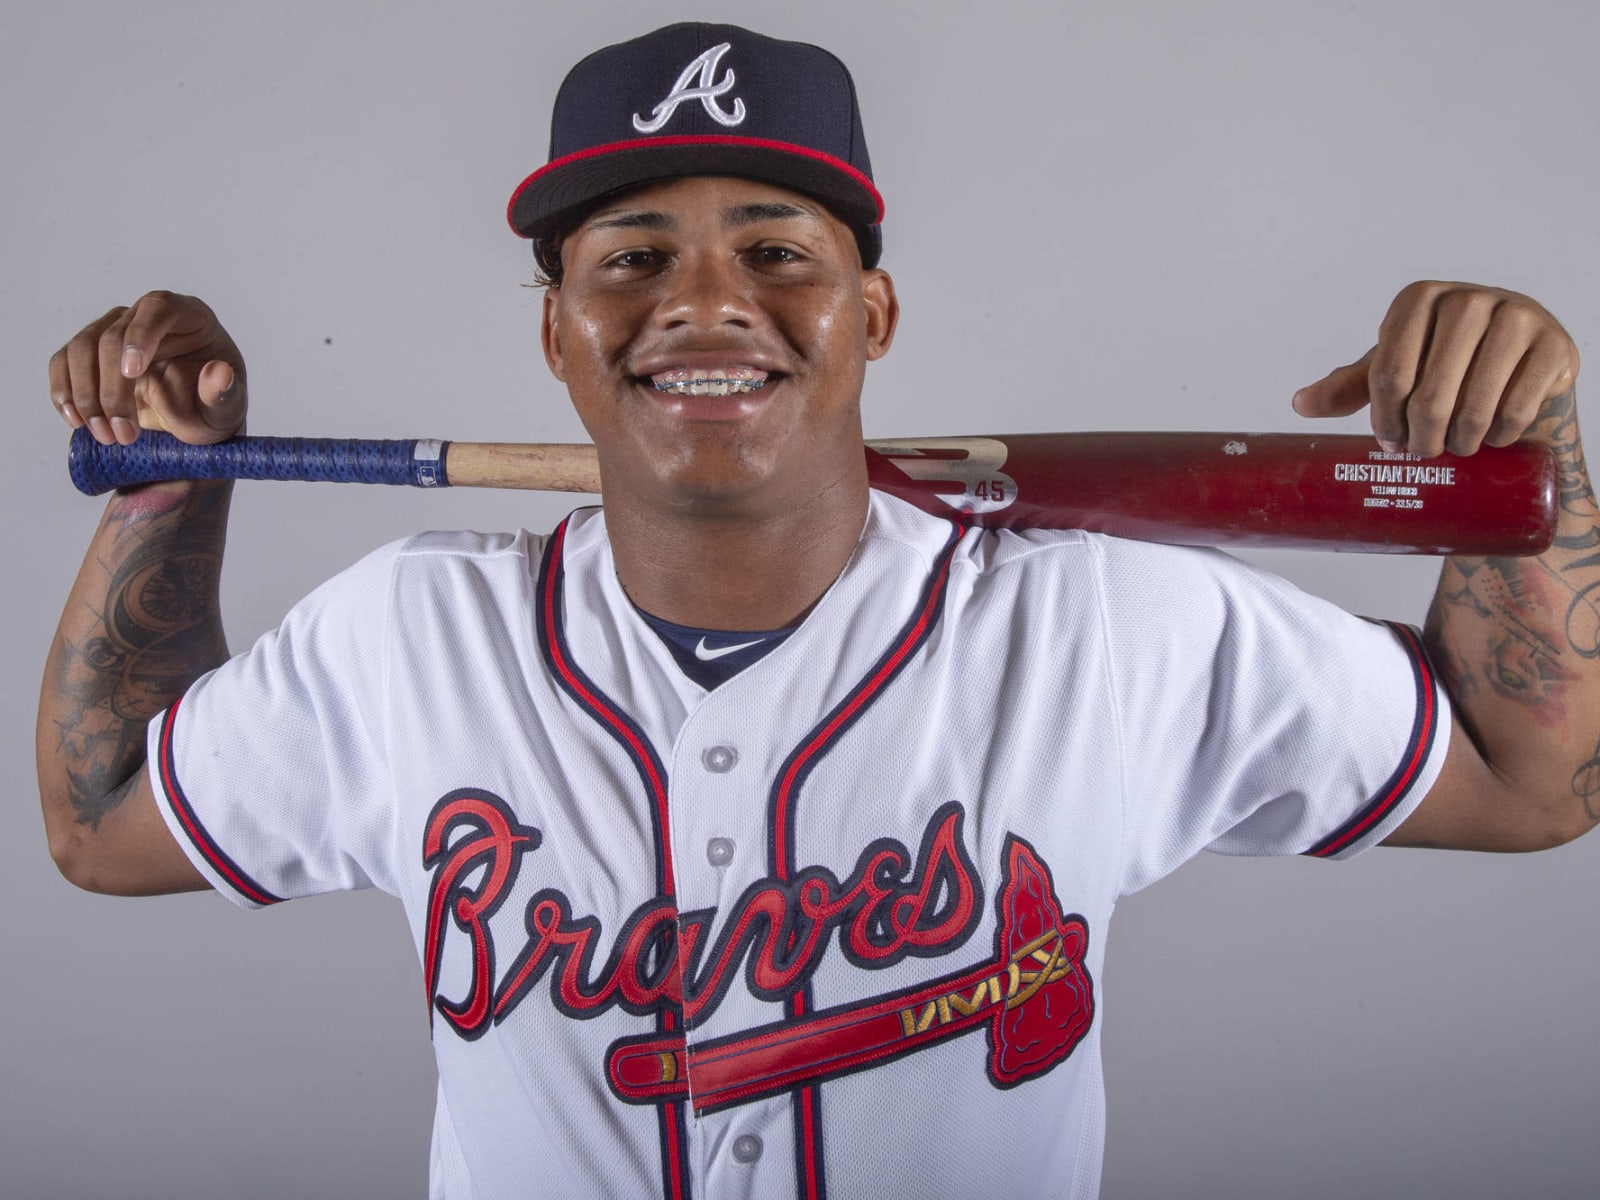 Cristian Pache factoring into Braves' starting outfield earlier